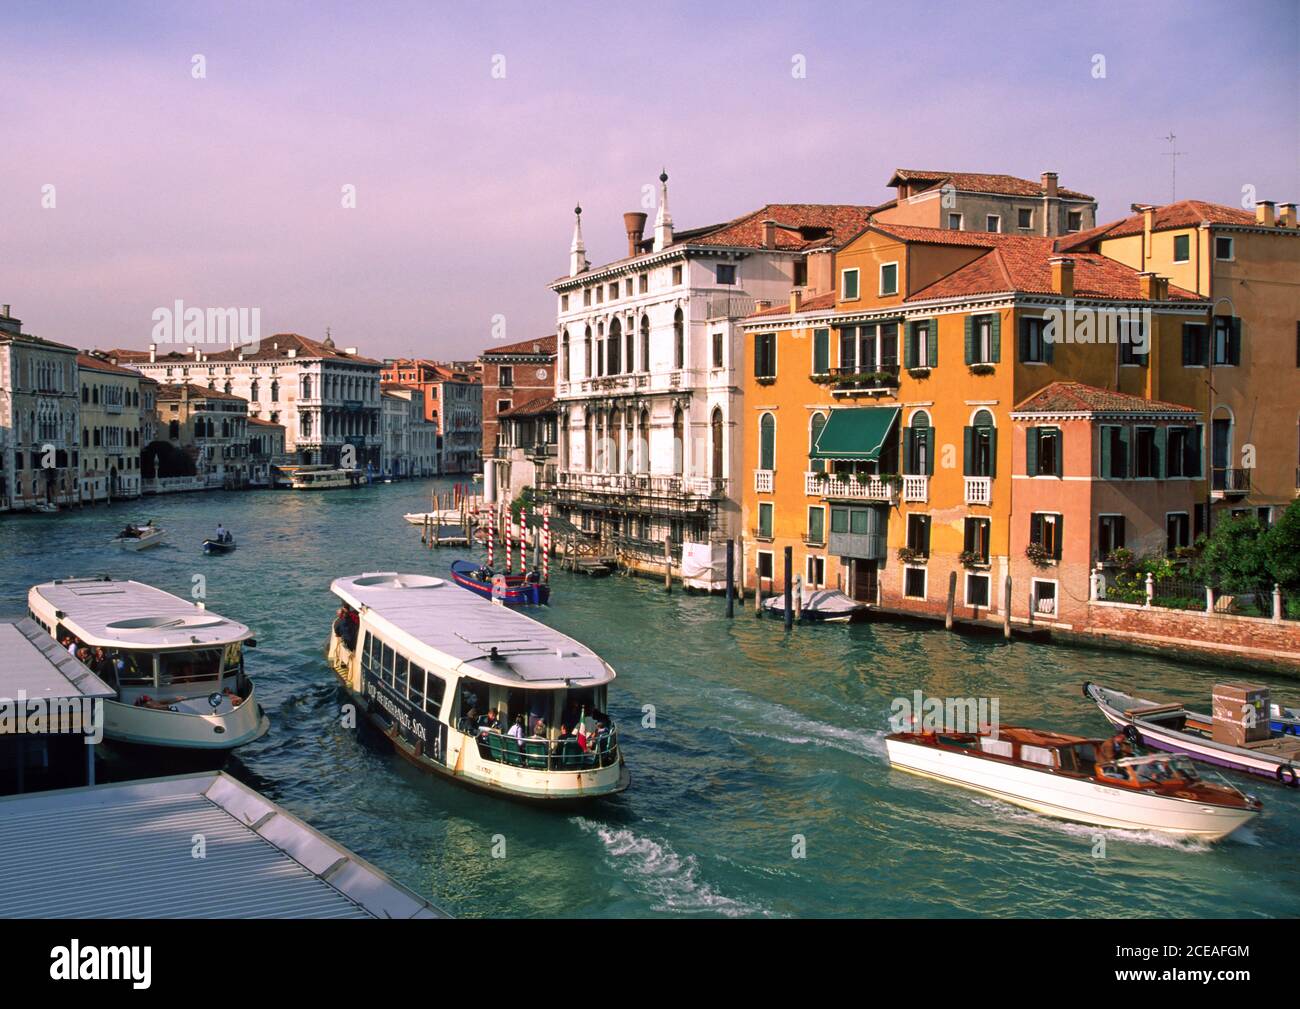 Venice and its vaporetti on the canals Stock Photo